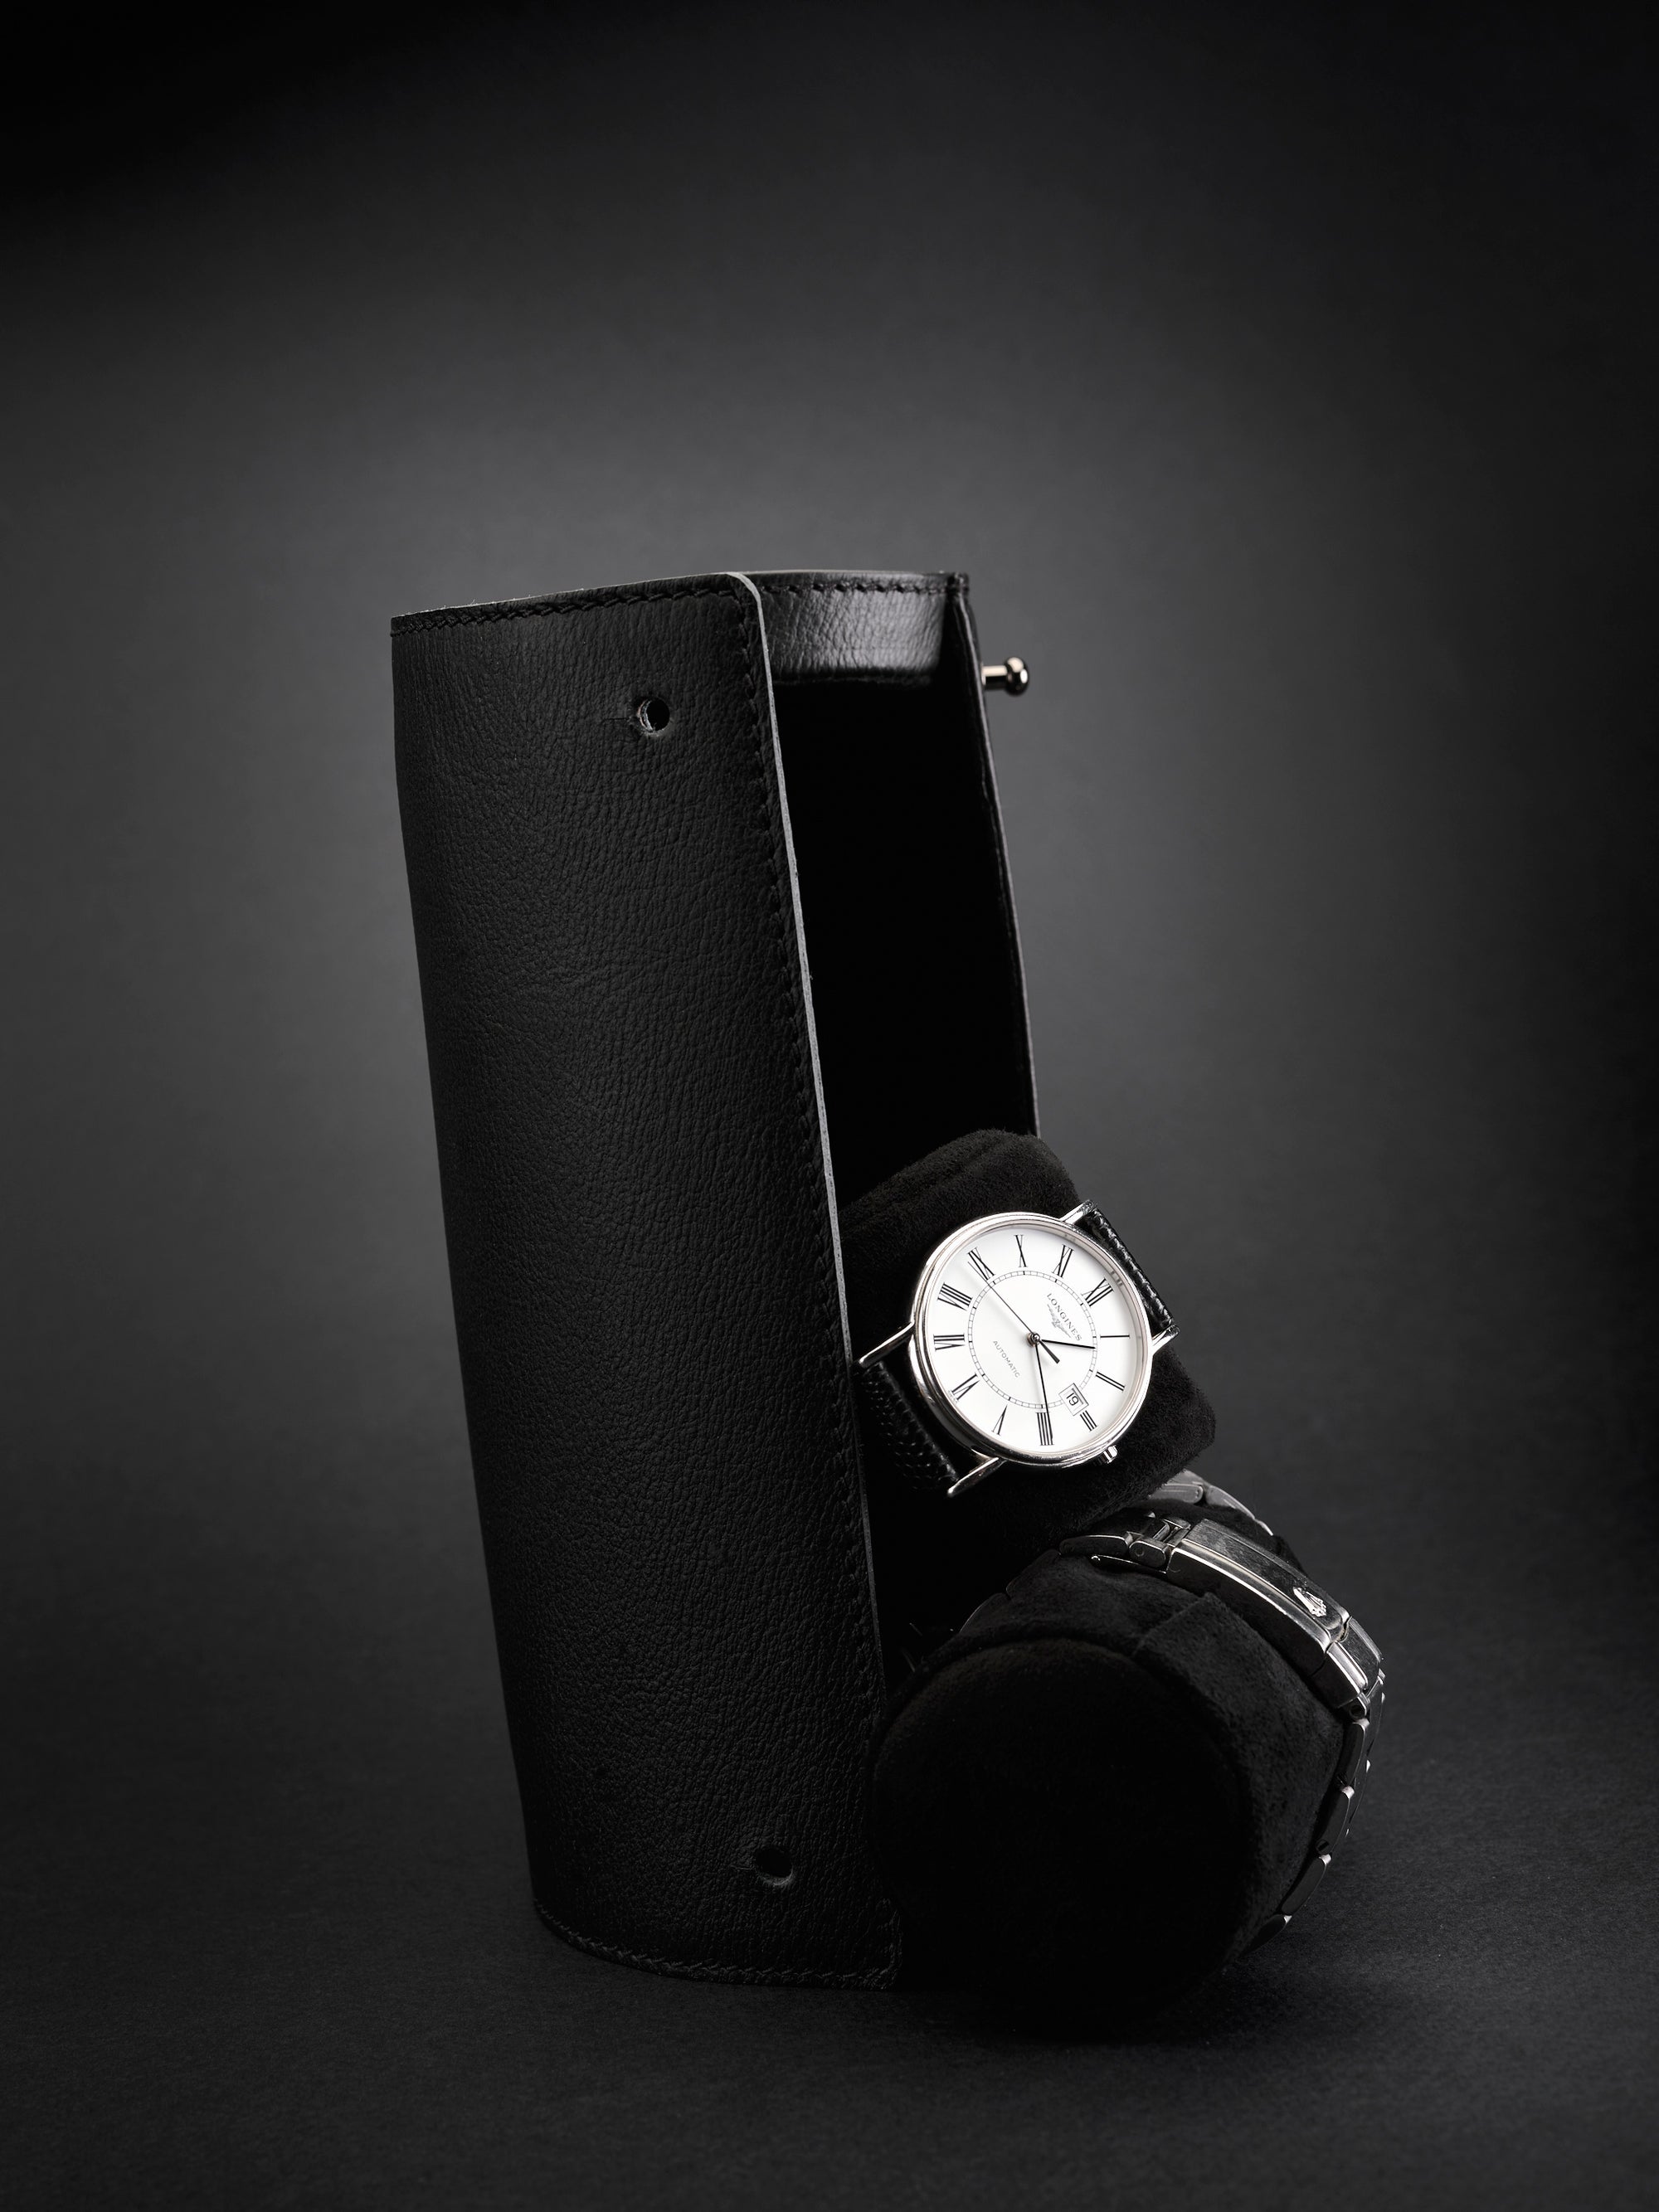 Invicta watch cases black by Capra Leather